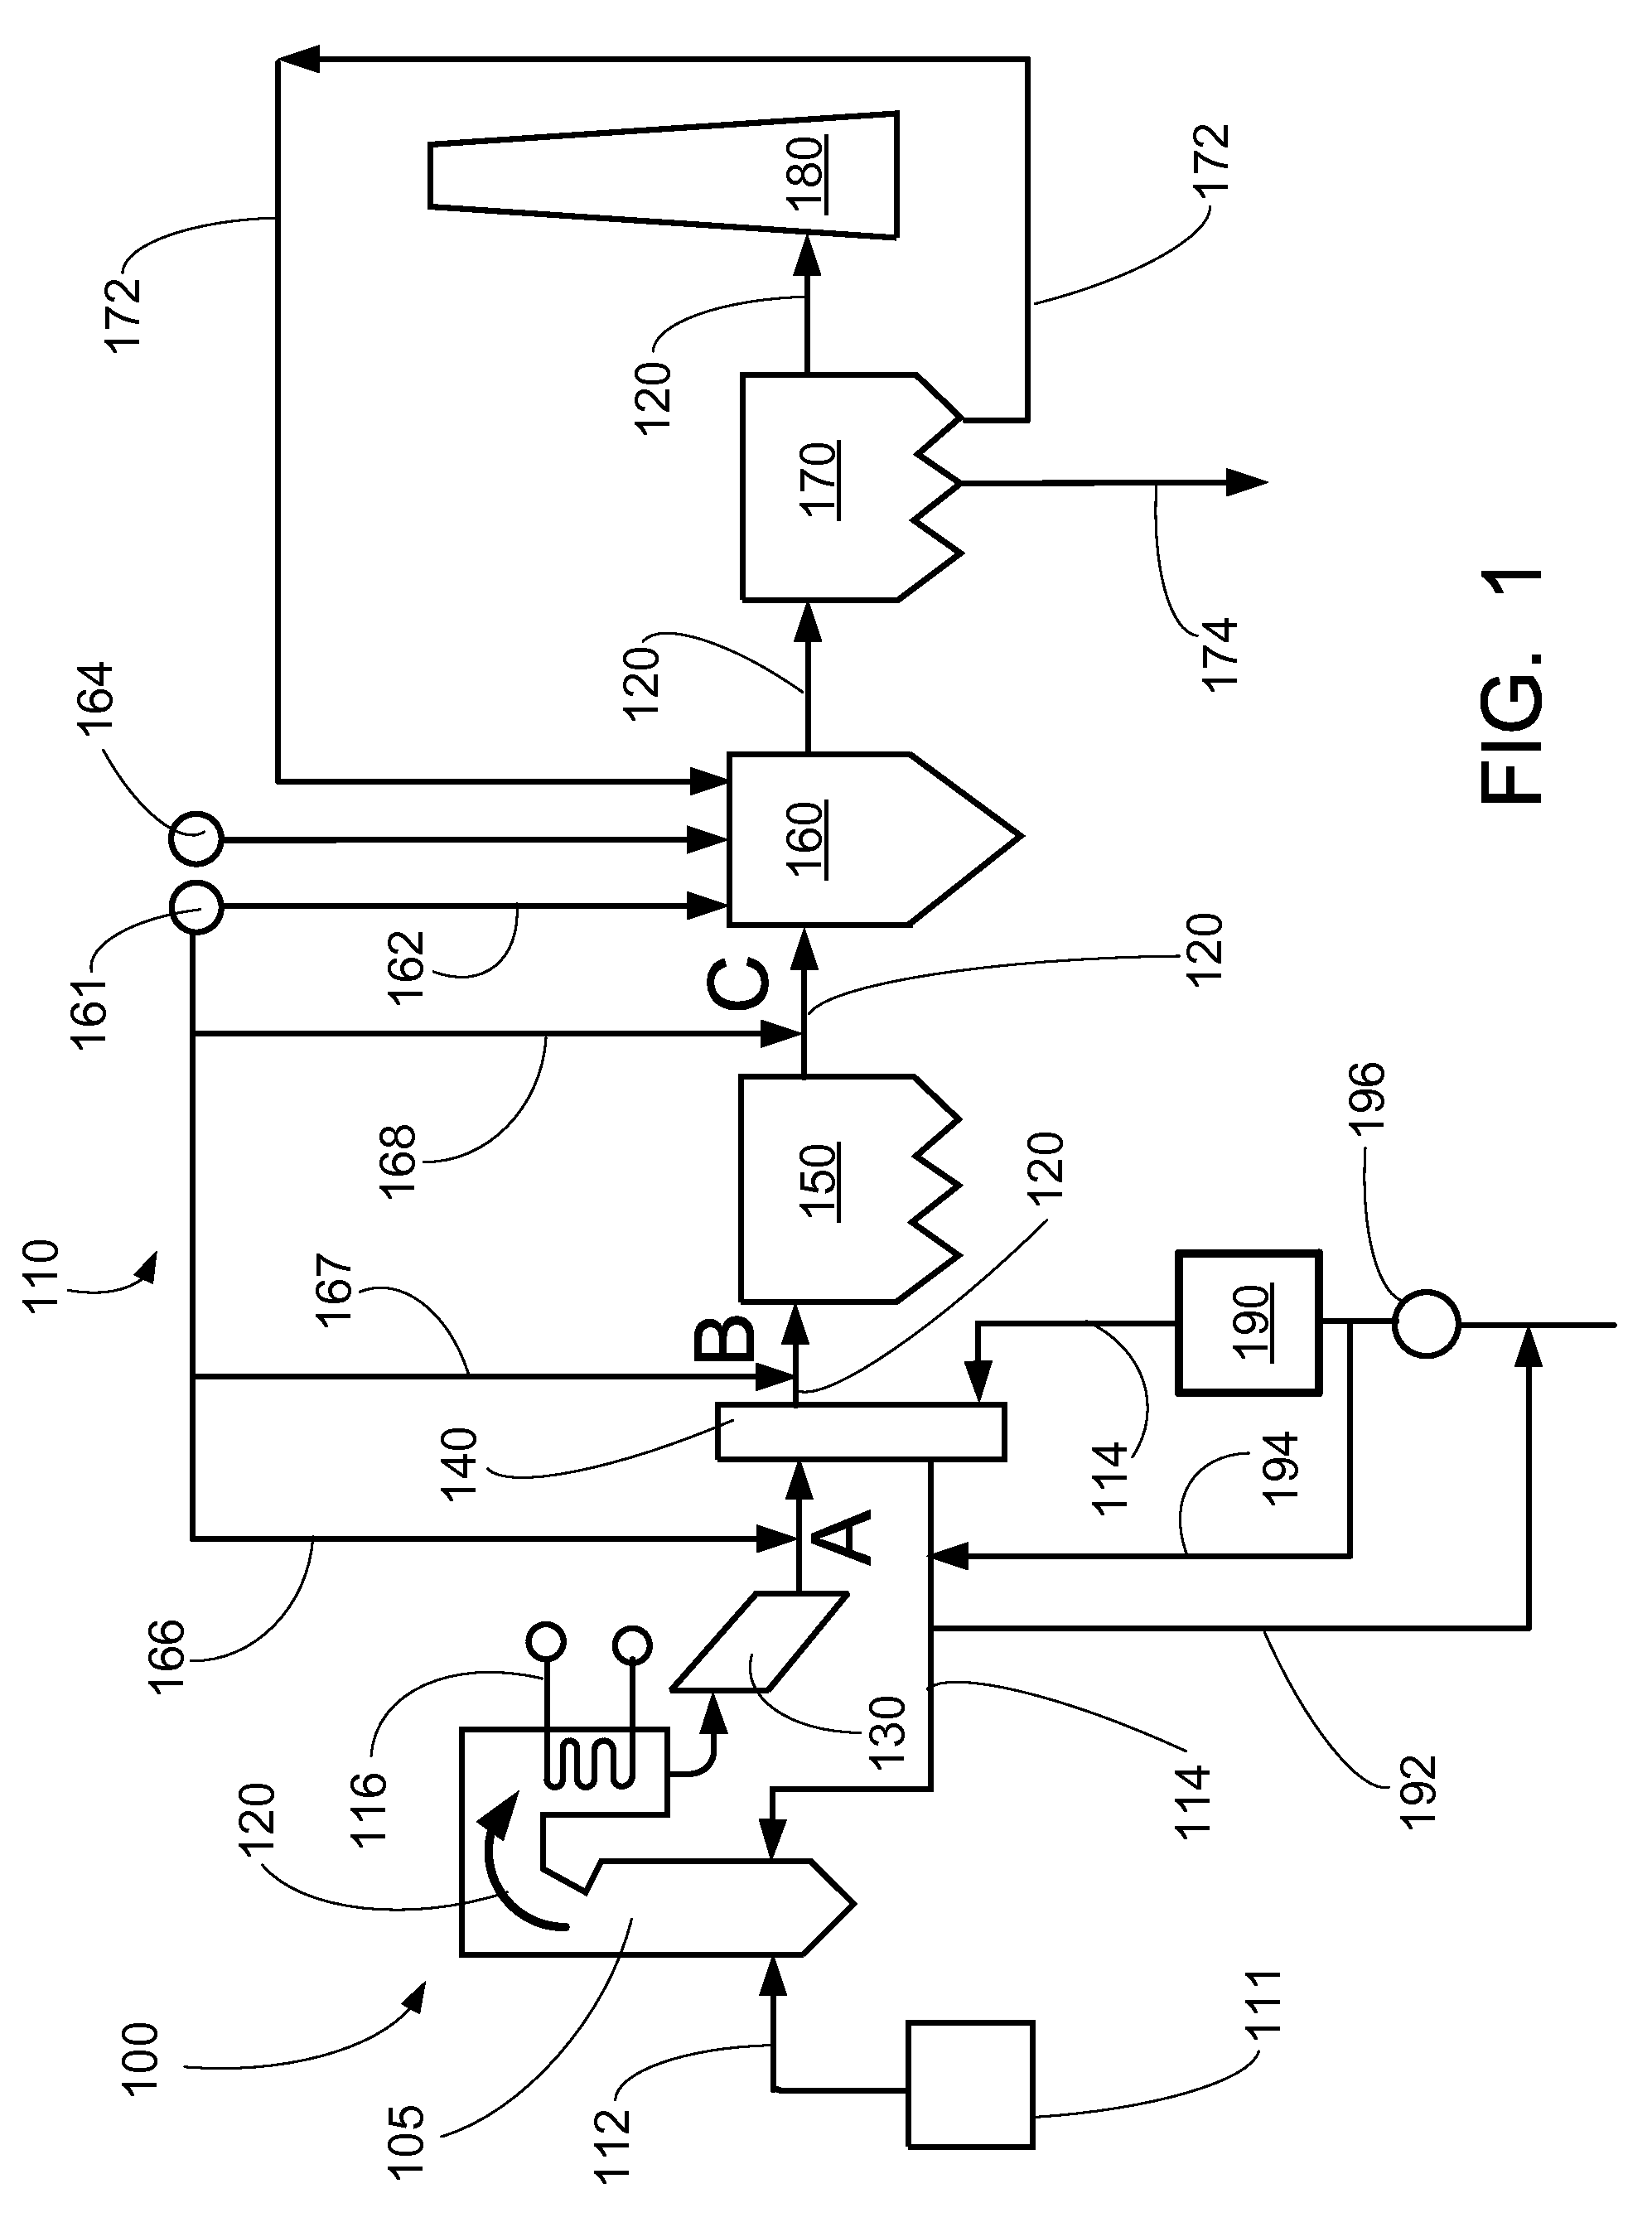 Integrated sorbent injection and flue gas desulfurization system